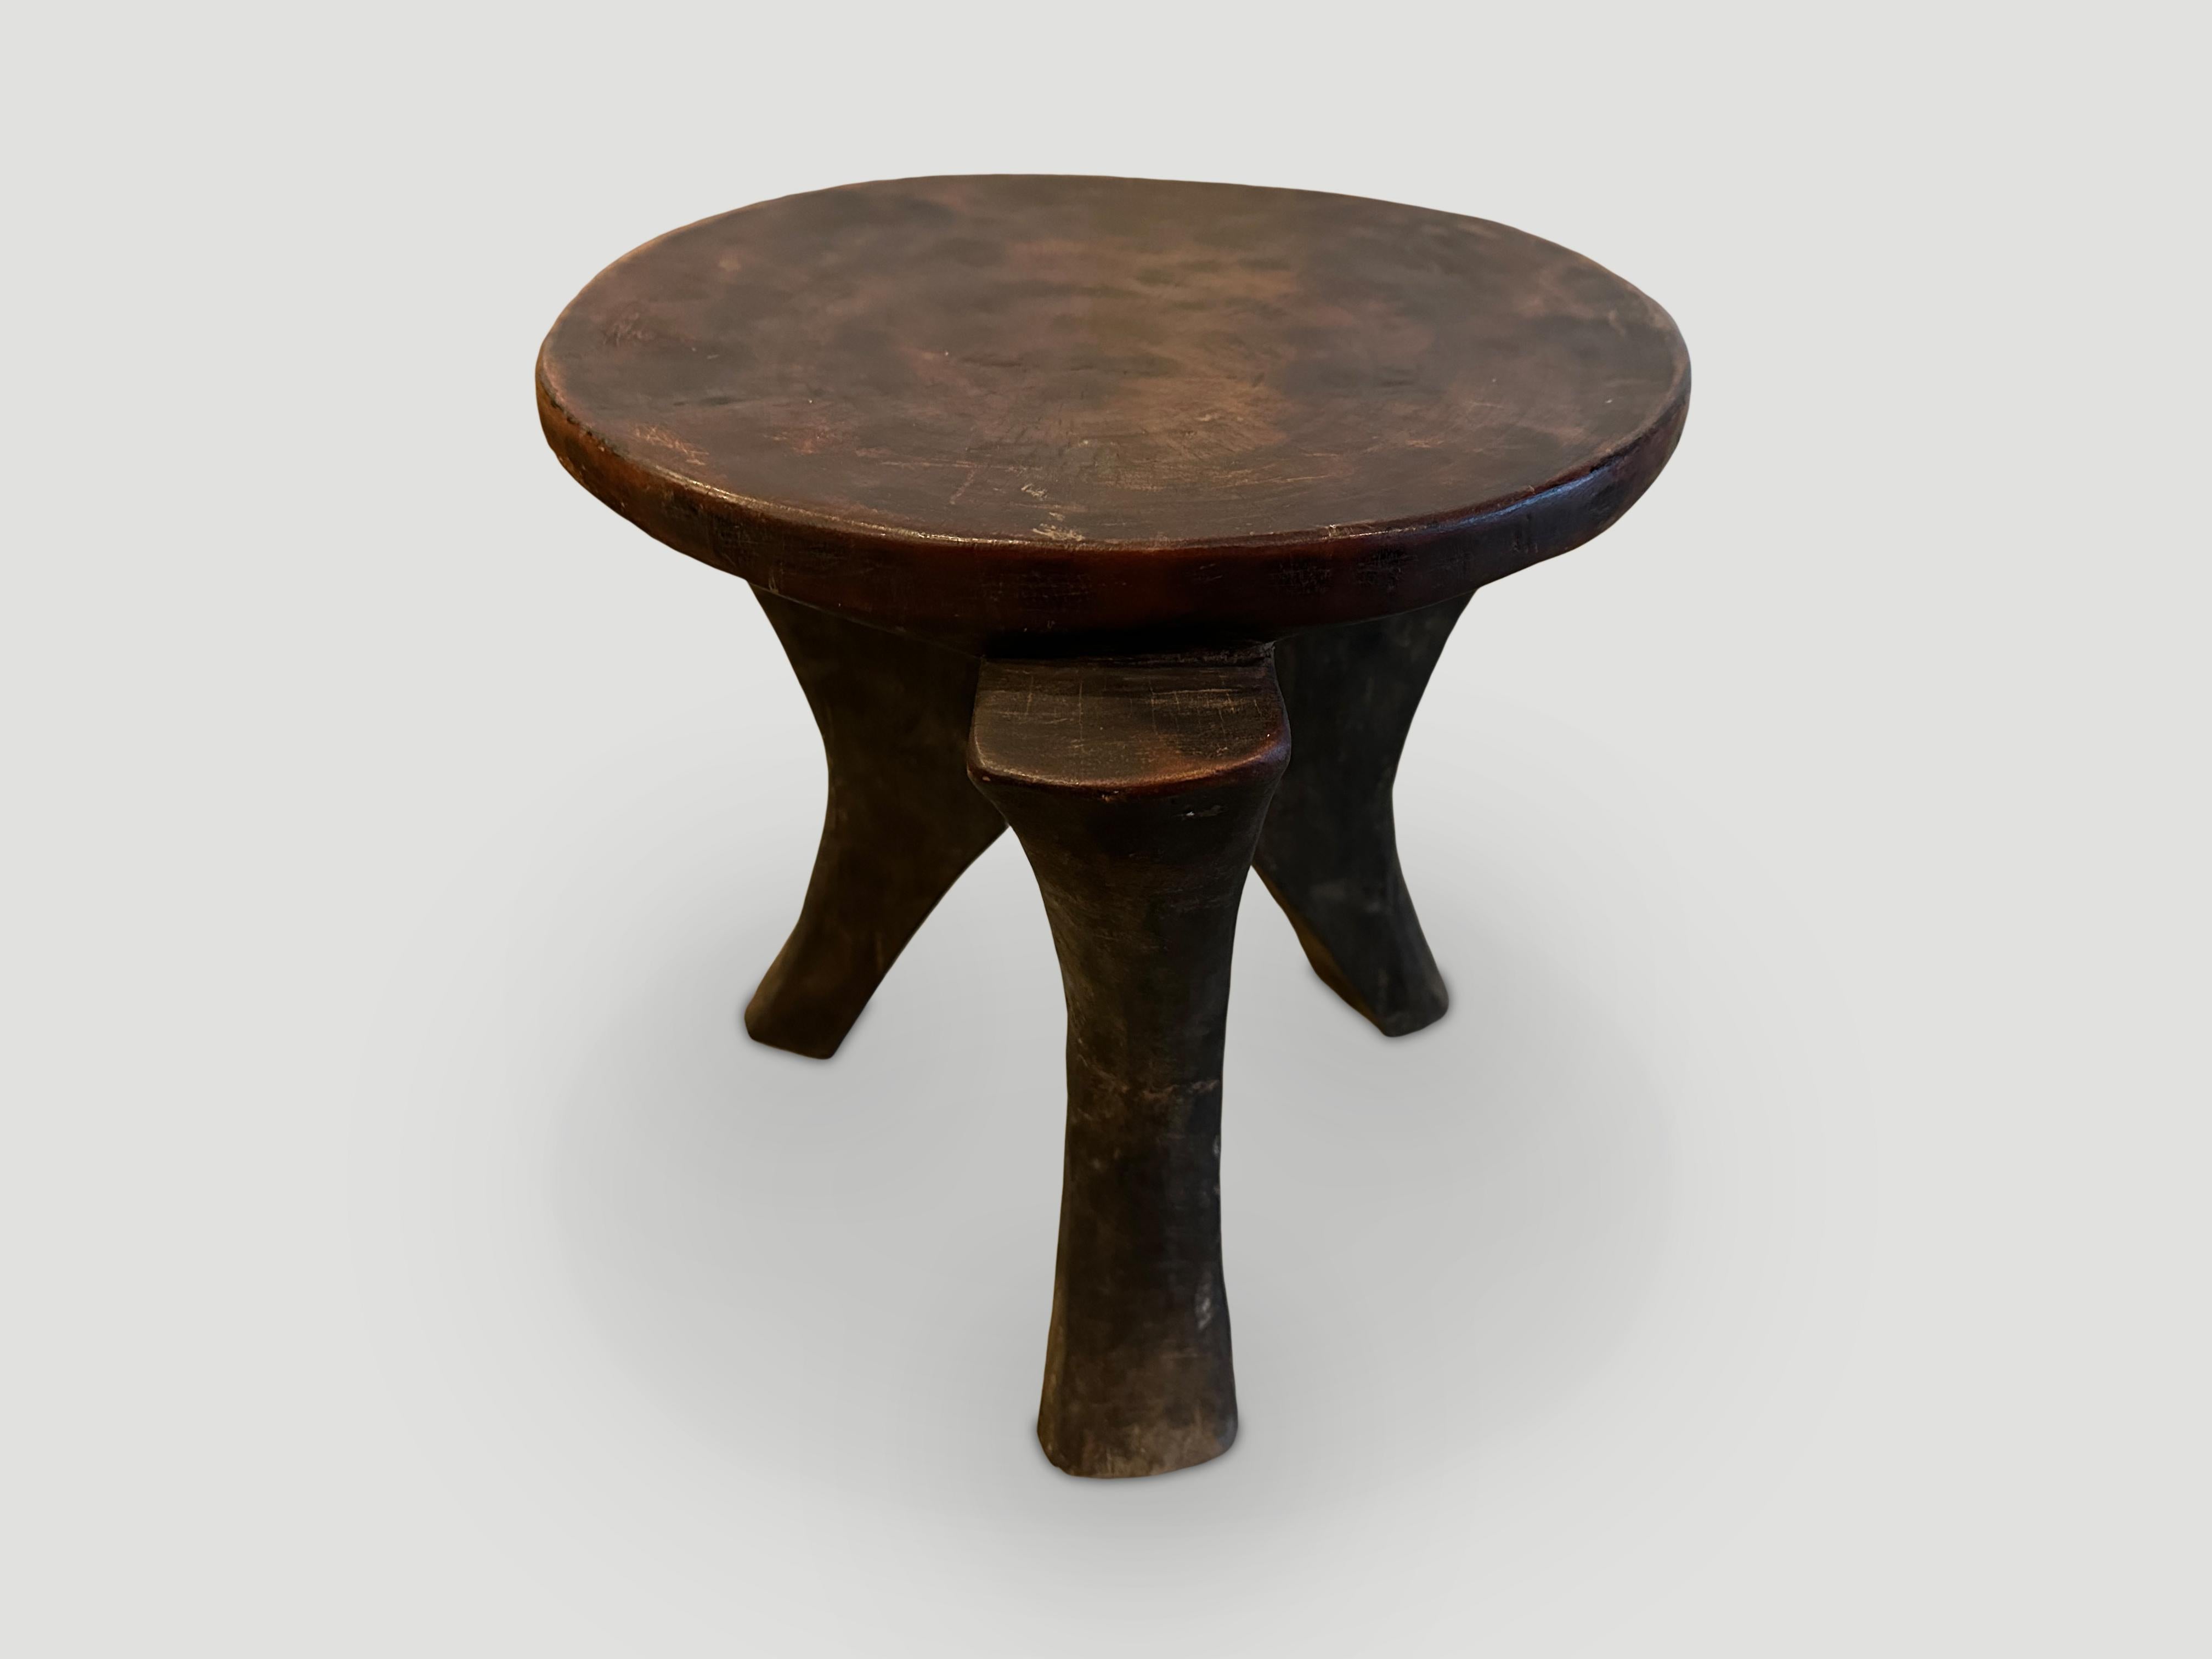 Beautiful African side table with lovely patina. The entire piece is hand carved out of a single block of mahogany wood. We only source the best. 

This side table was sourced in the spirit of Wabi Sabi, a Japanese philosophy that beauty can be